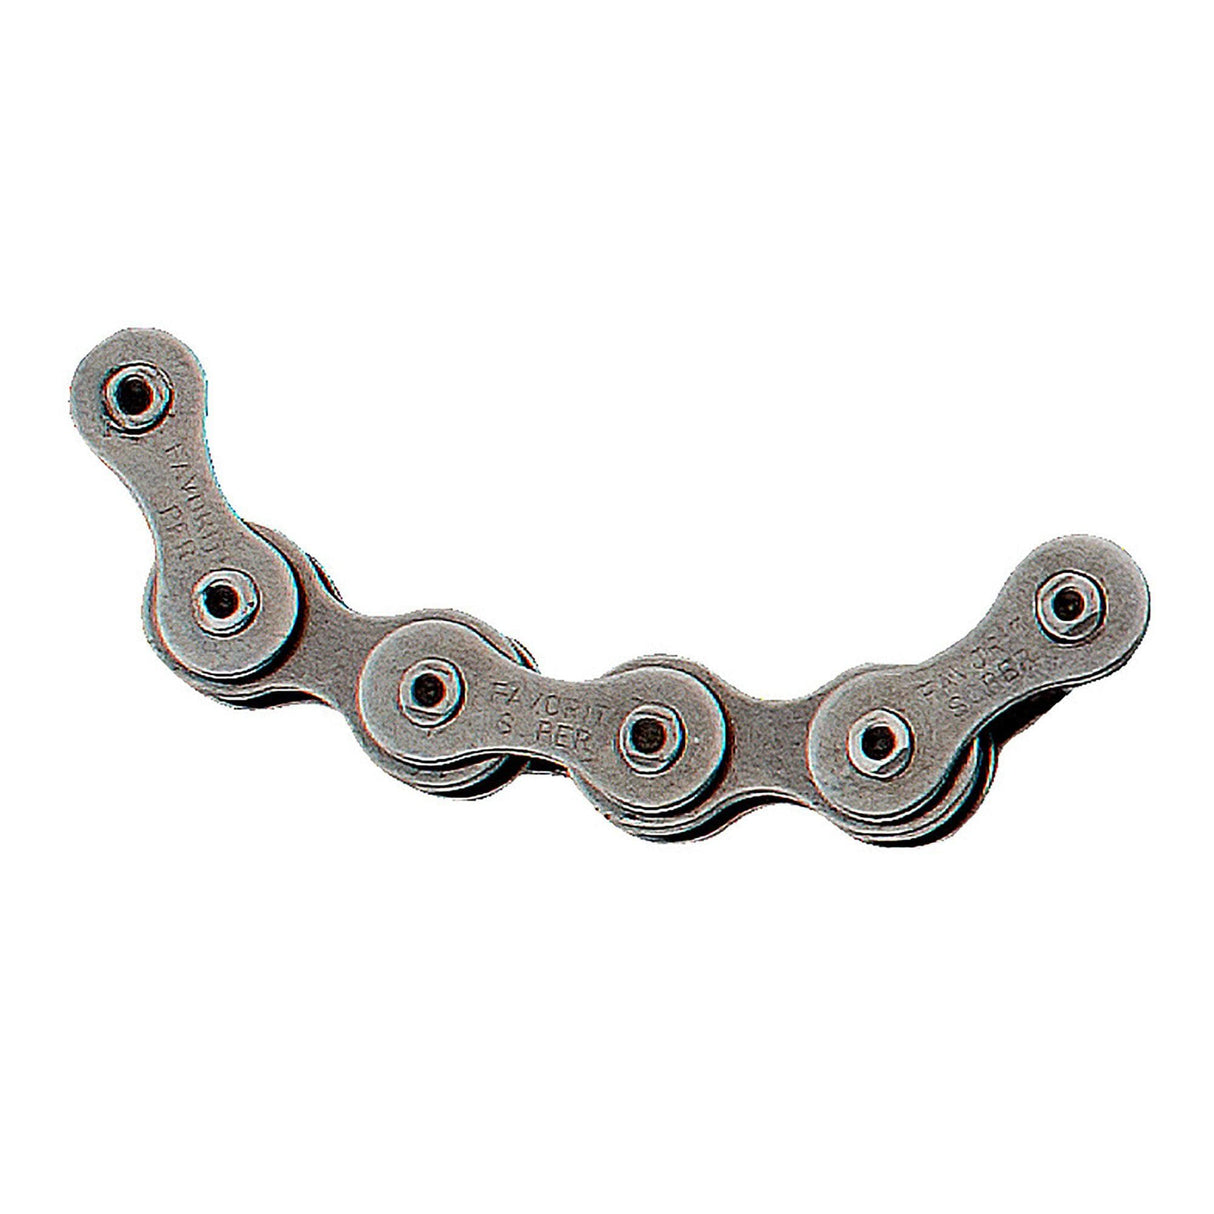 Unior Chain For 1660/2, 5 Links:  79Mm